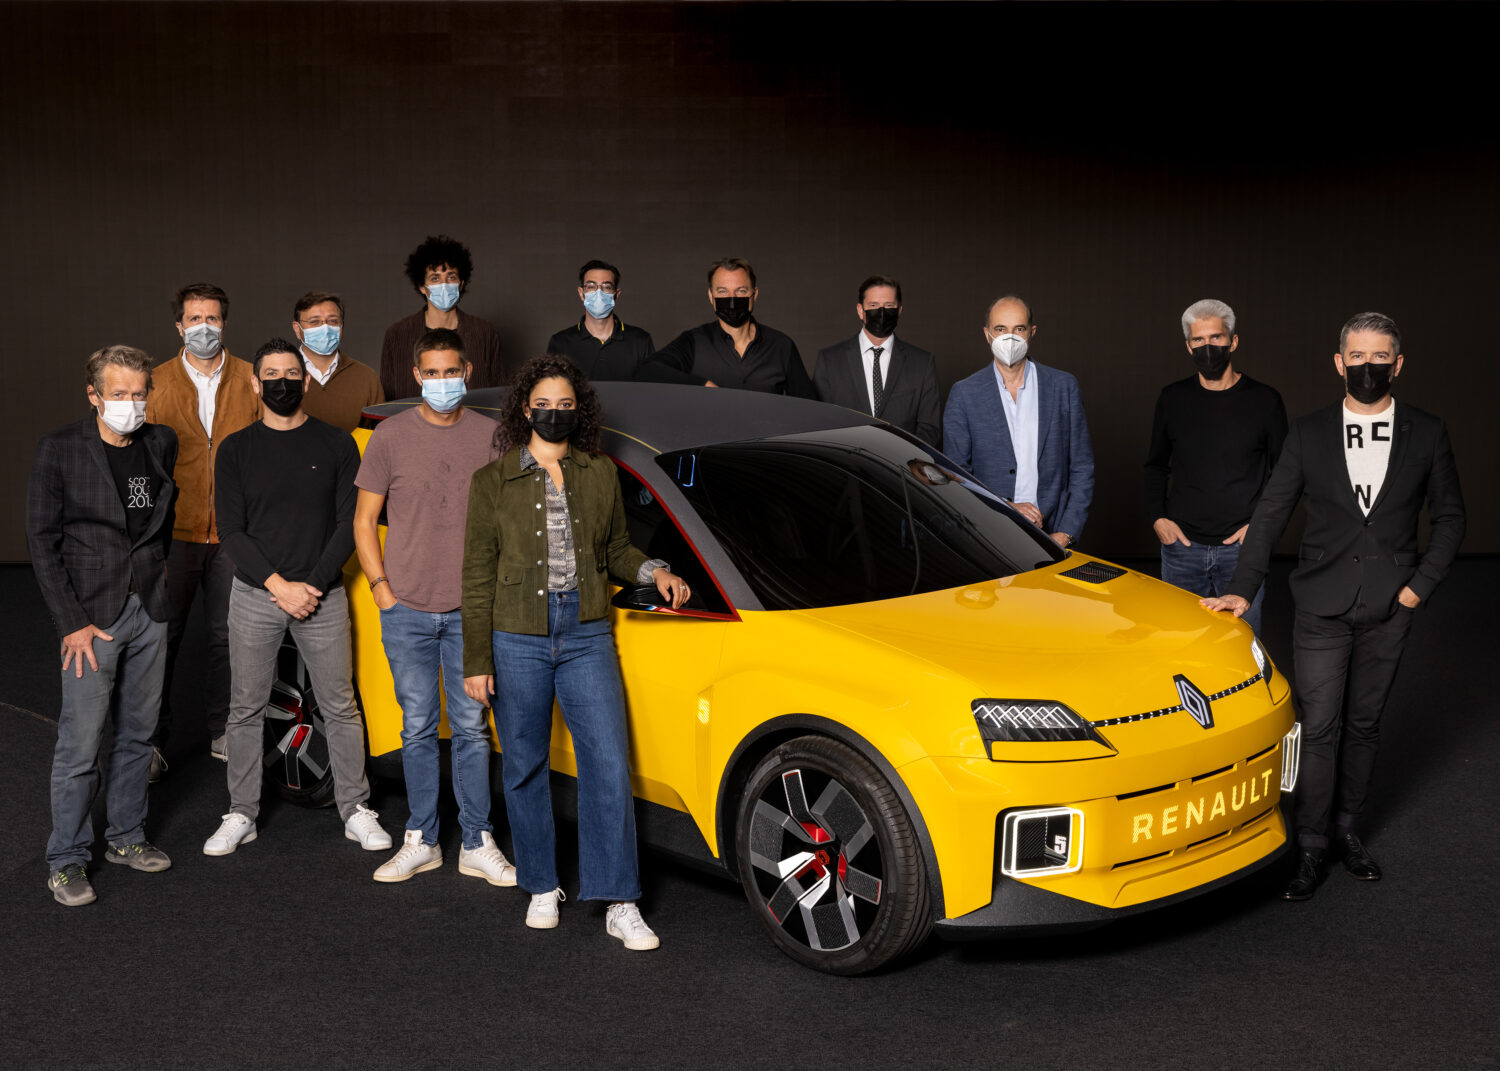 2021 - Renault 5 Prototype elected Concept-Car of the Year